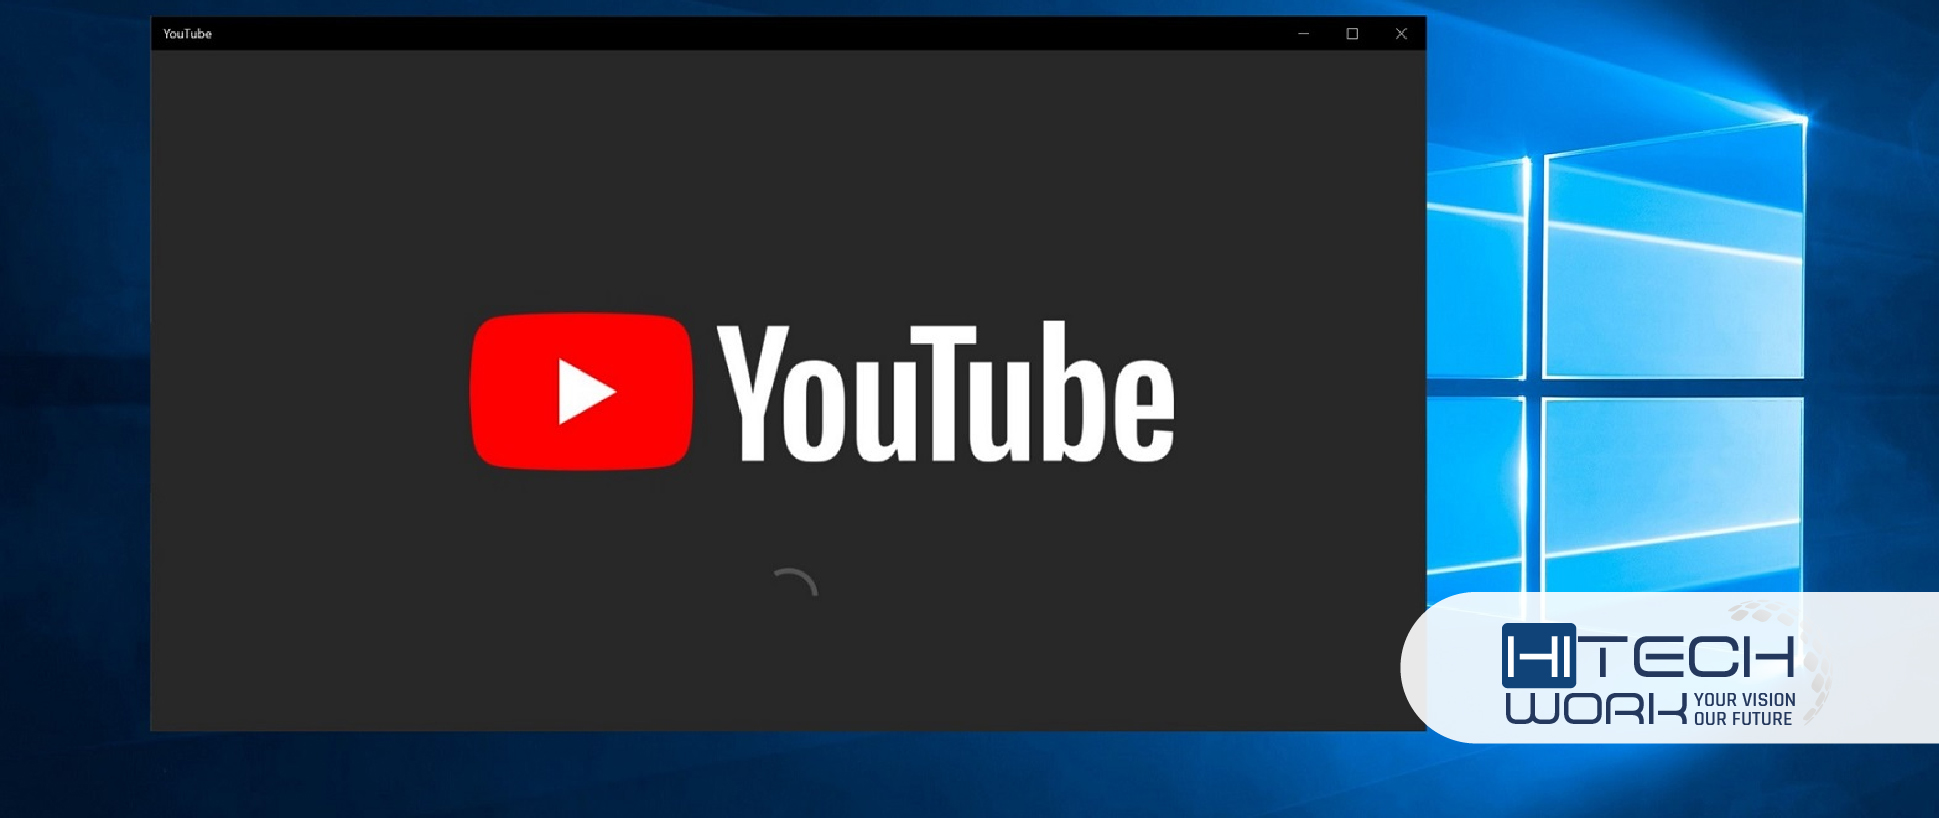 how to download audio from Youtube on Mac